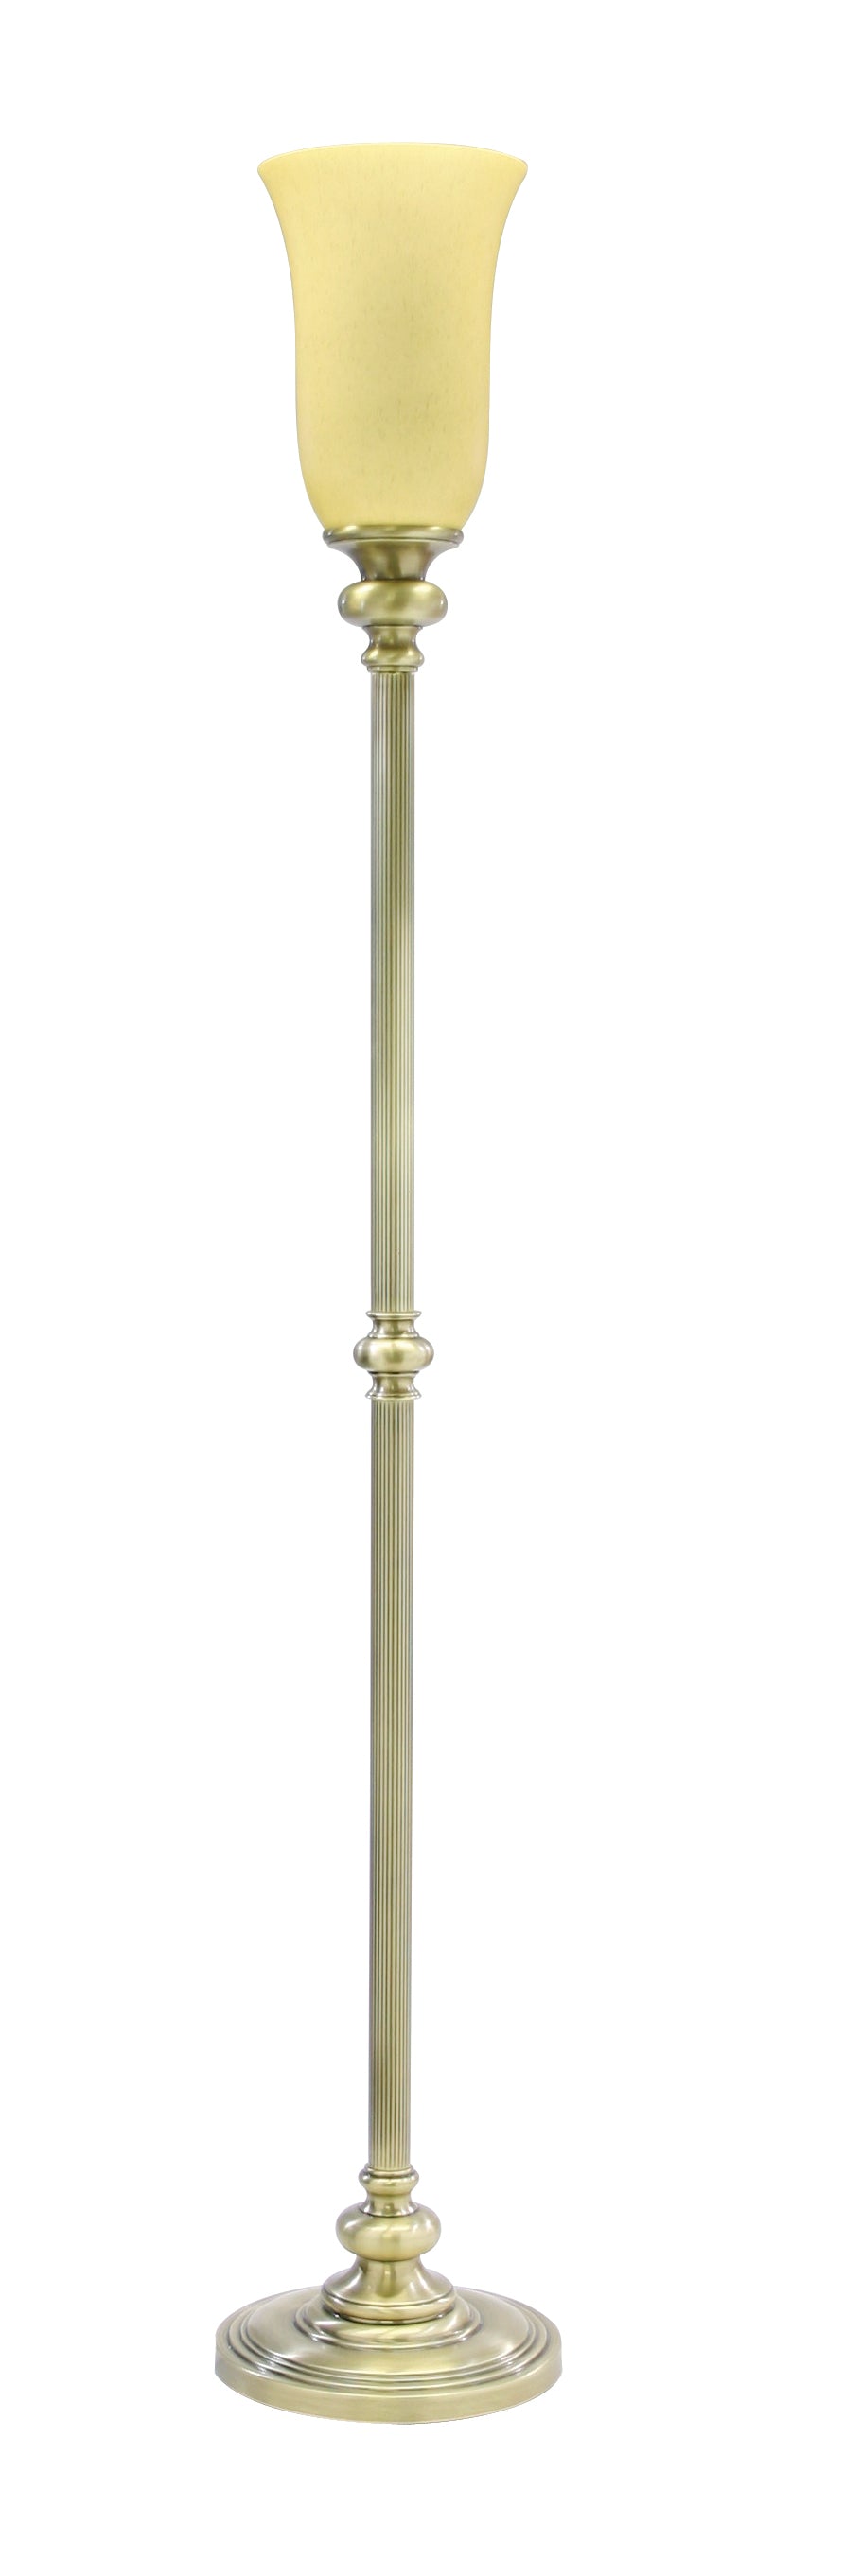 House of Troy Newport 74.75" Floor Lamp Antique Brass N600-AB